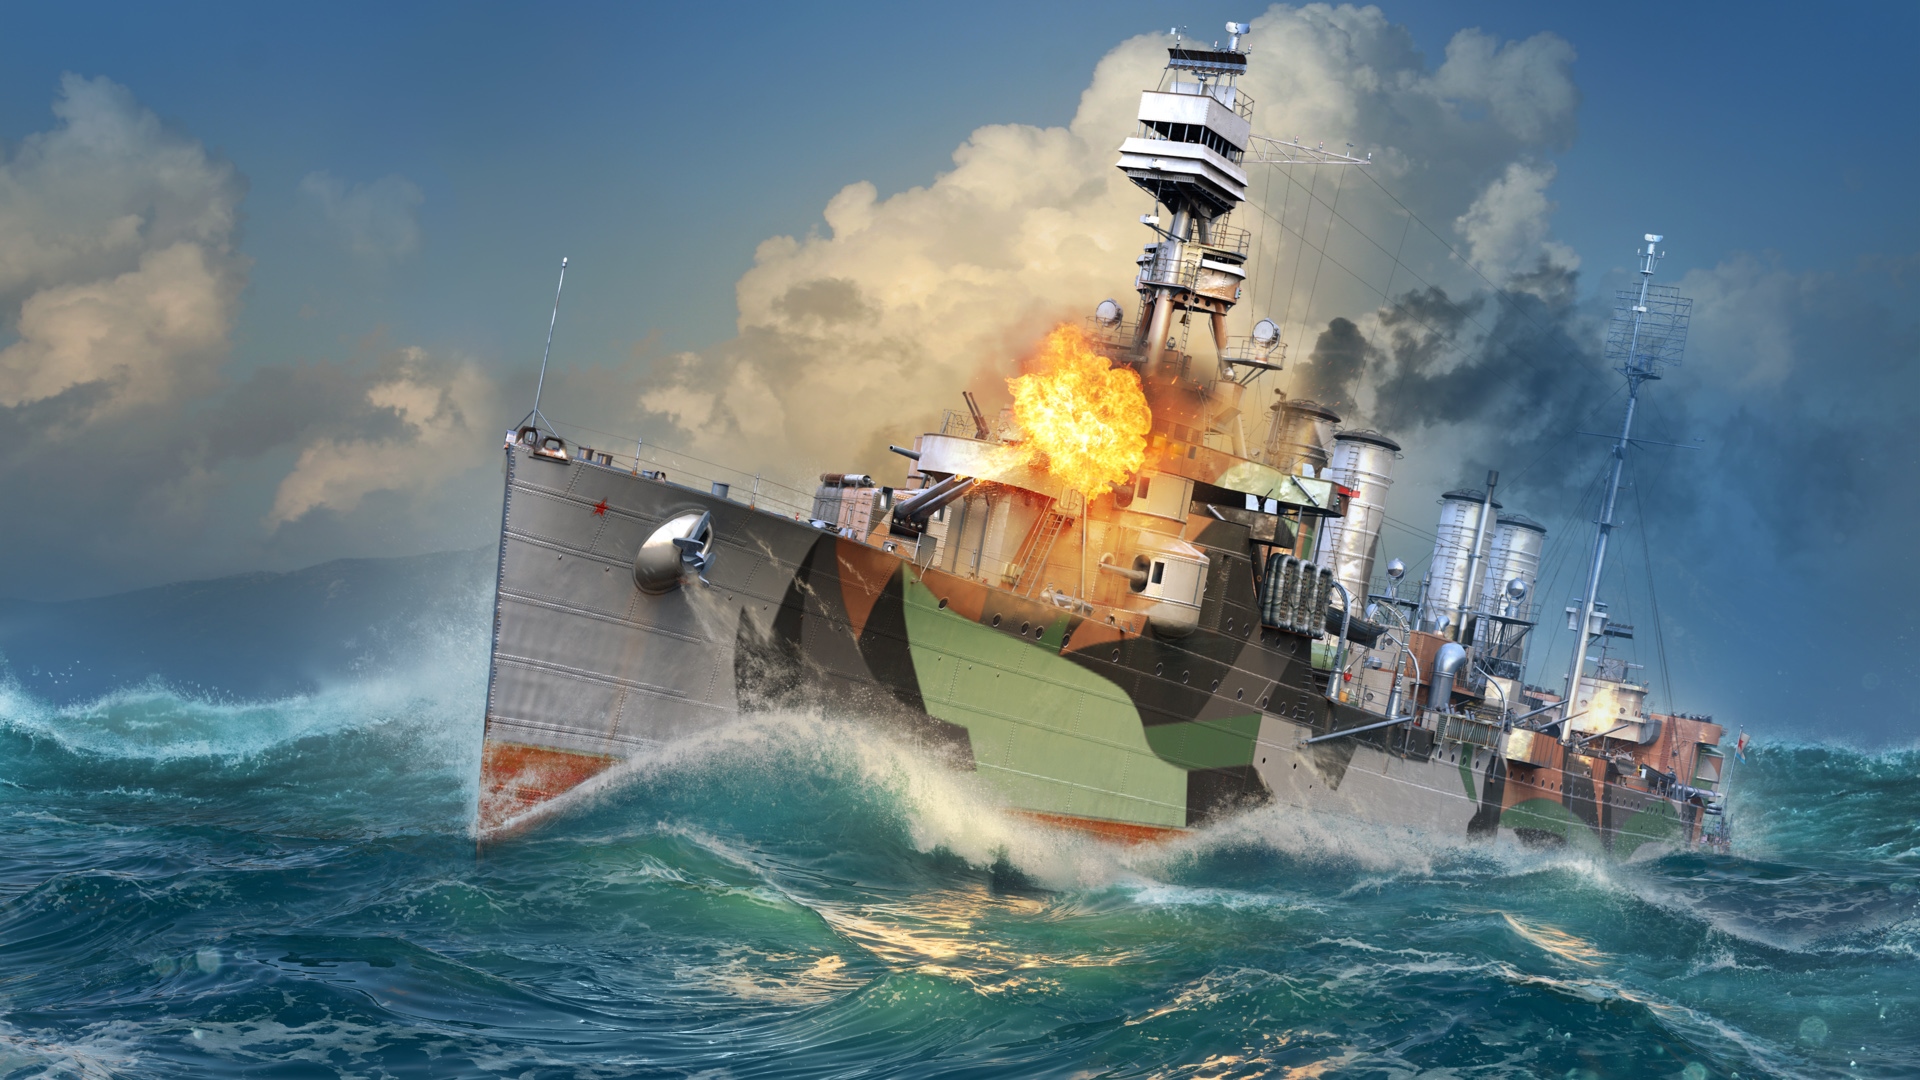 will world of warships blitz come to windws